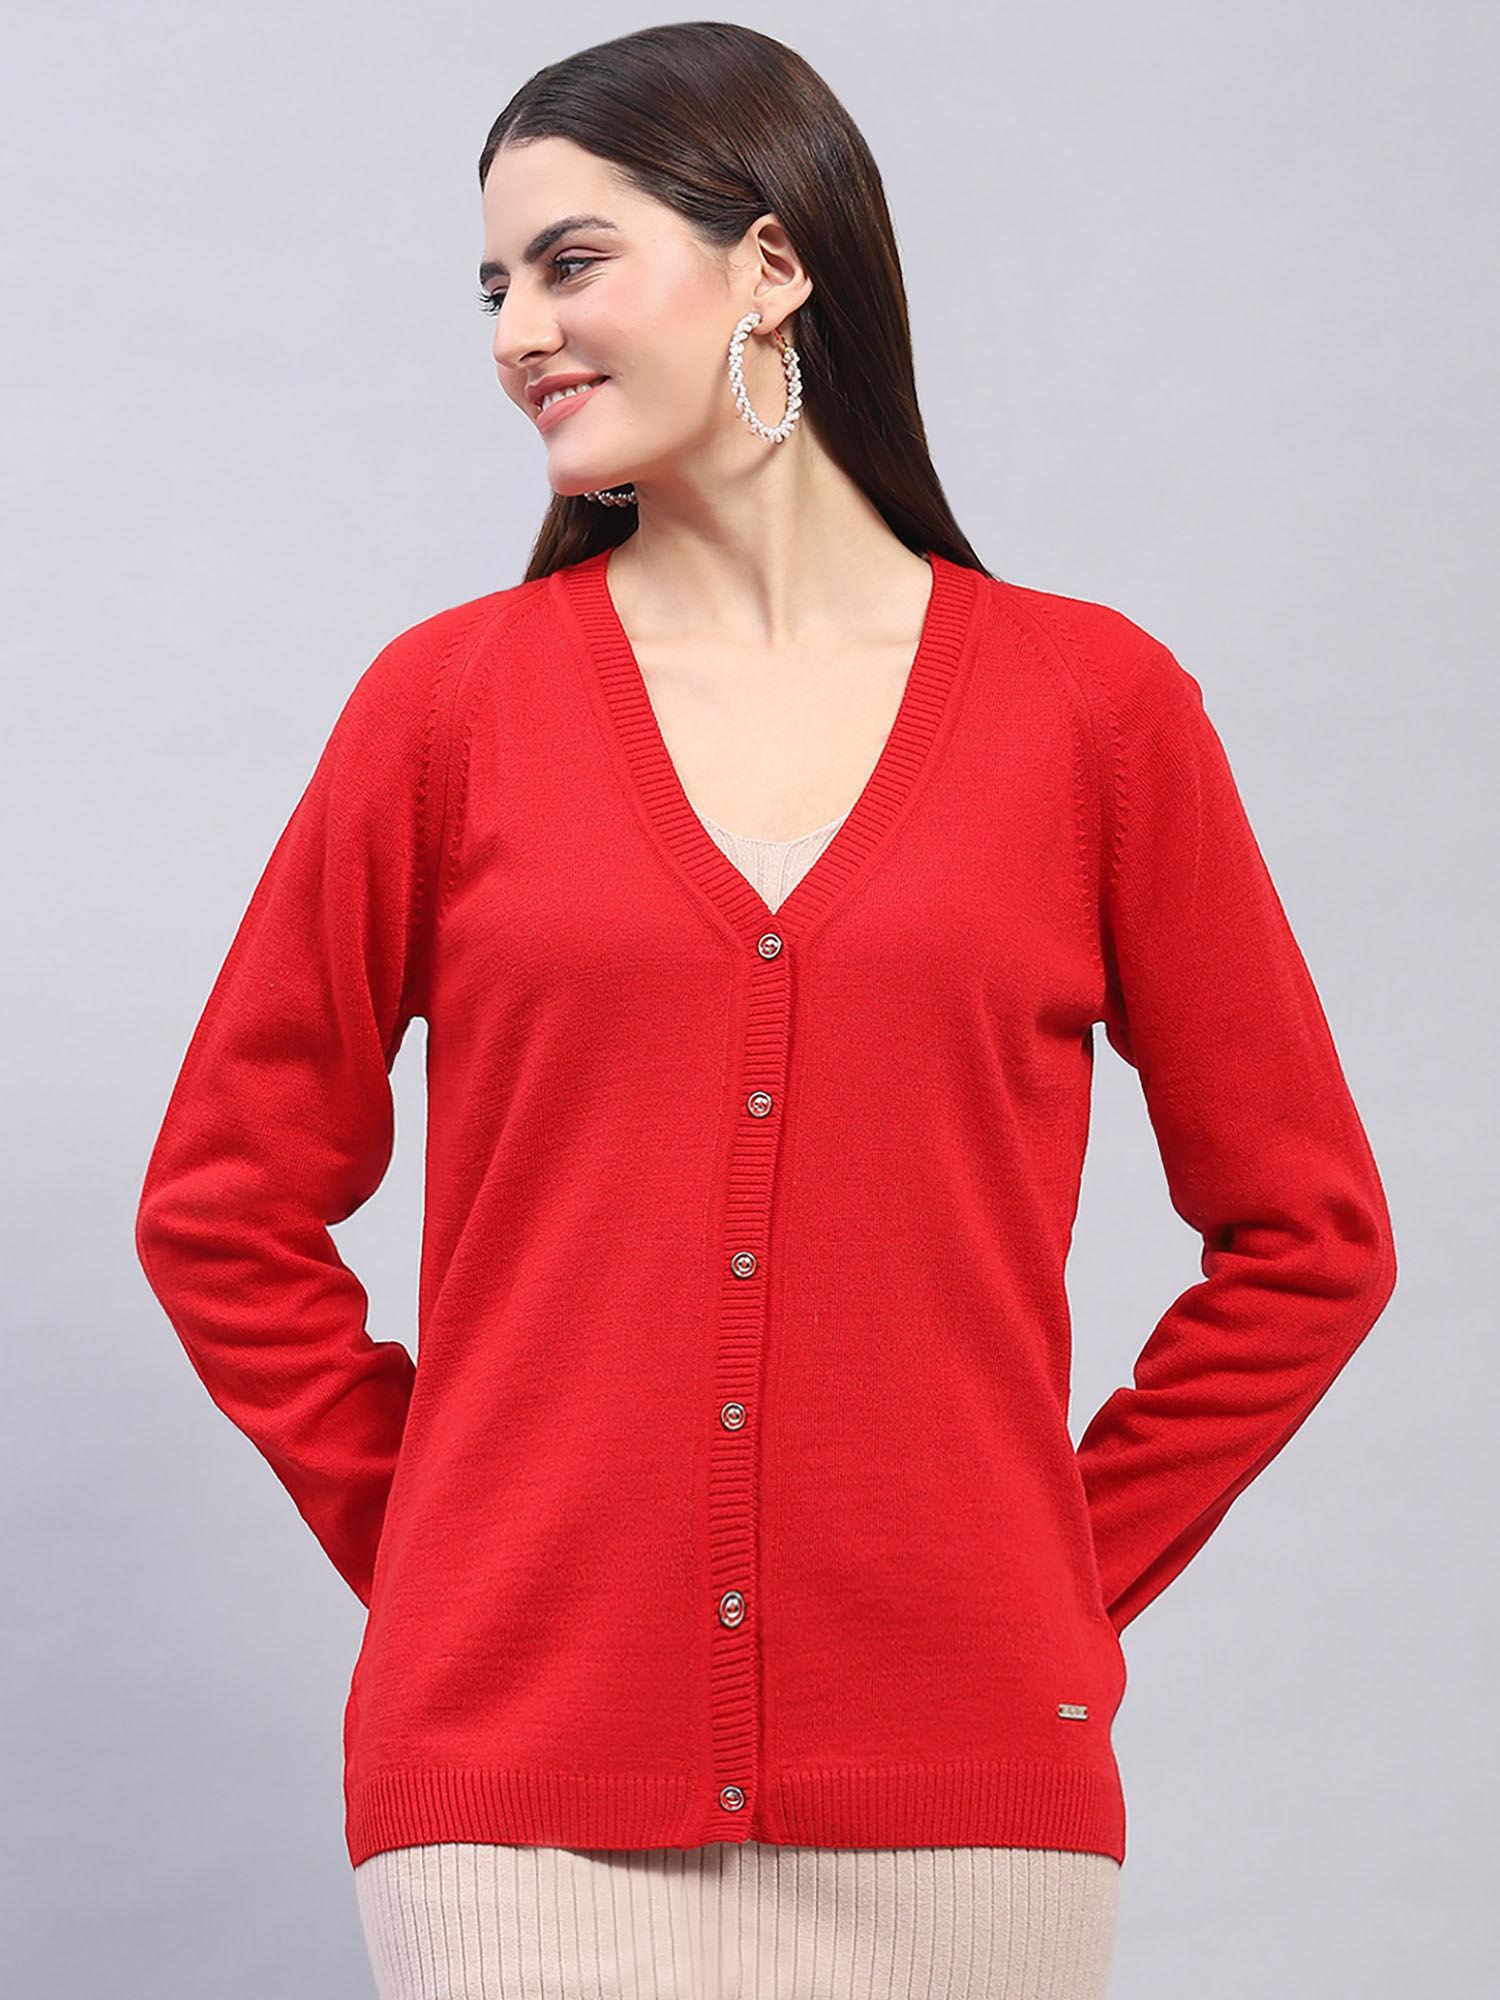 Womens Red Solid V Neck Full Sleeve Wool Blend Cardigan